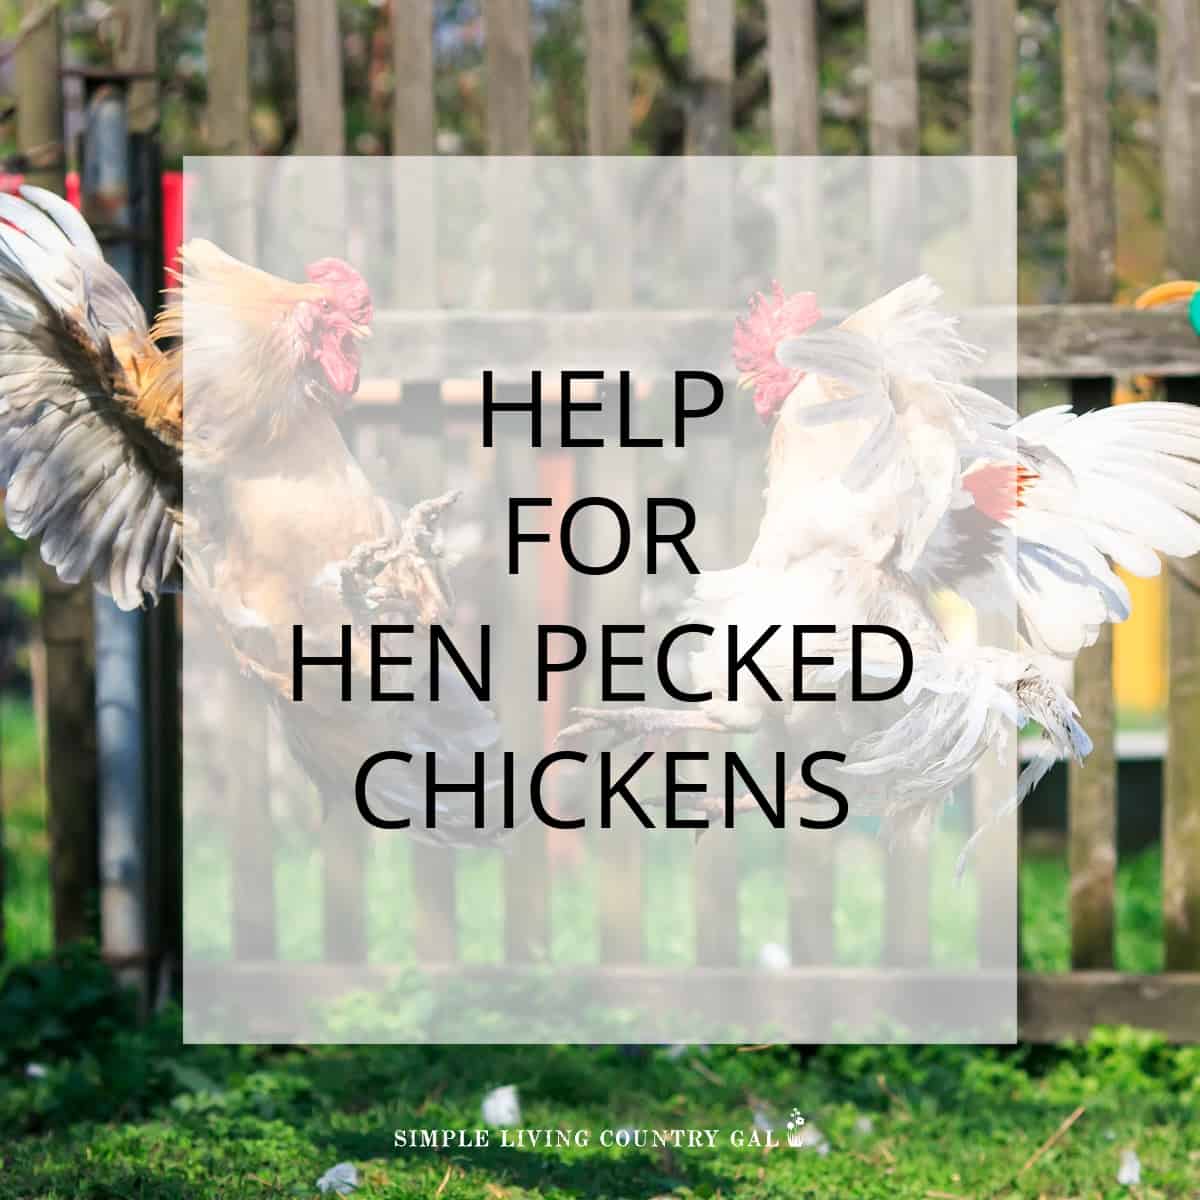 Help for Hen pecked chickens